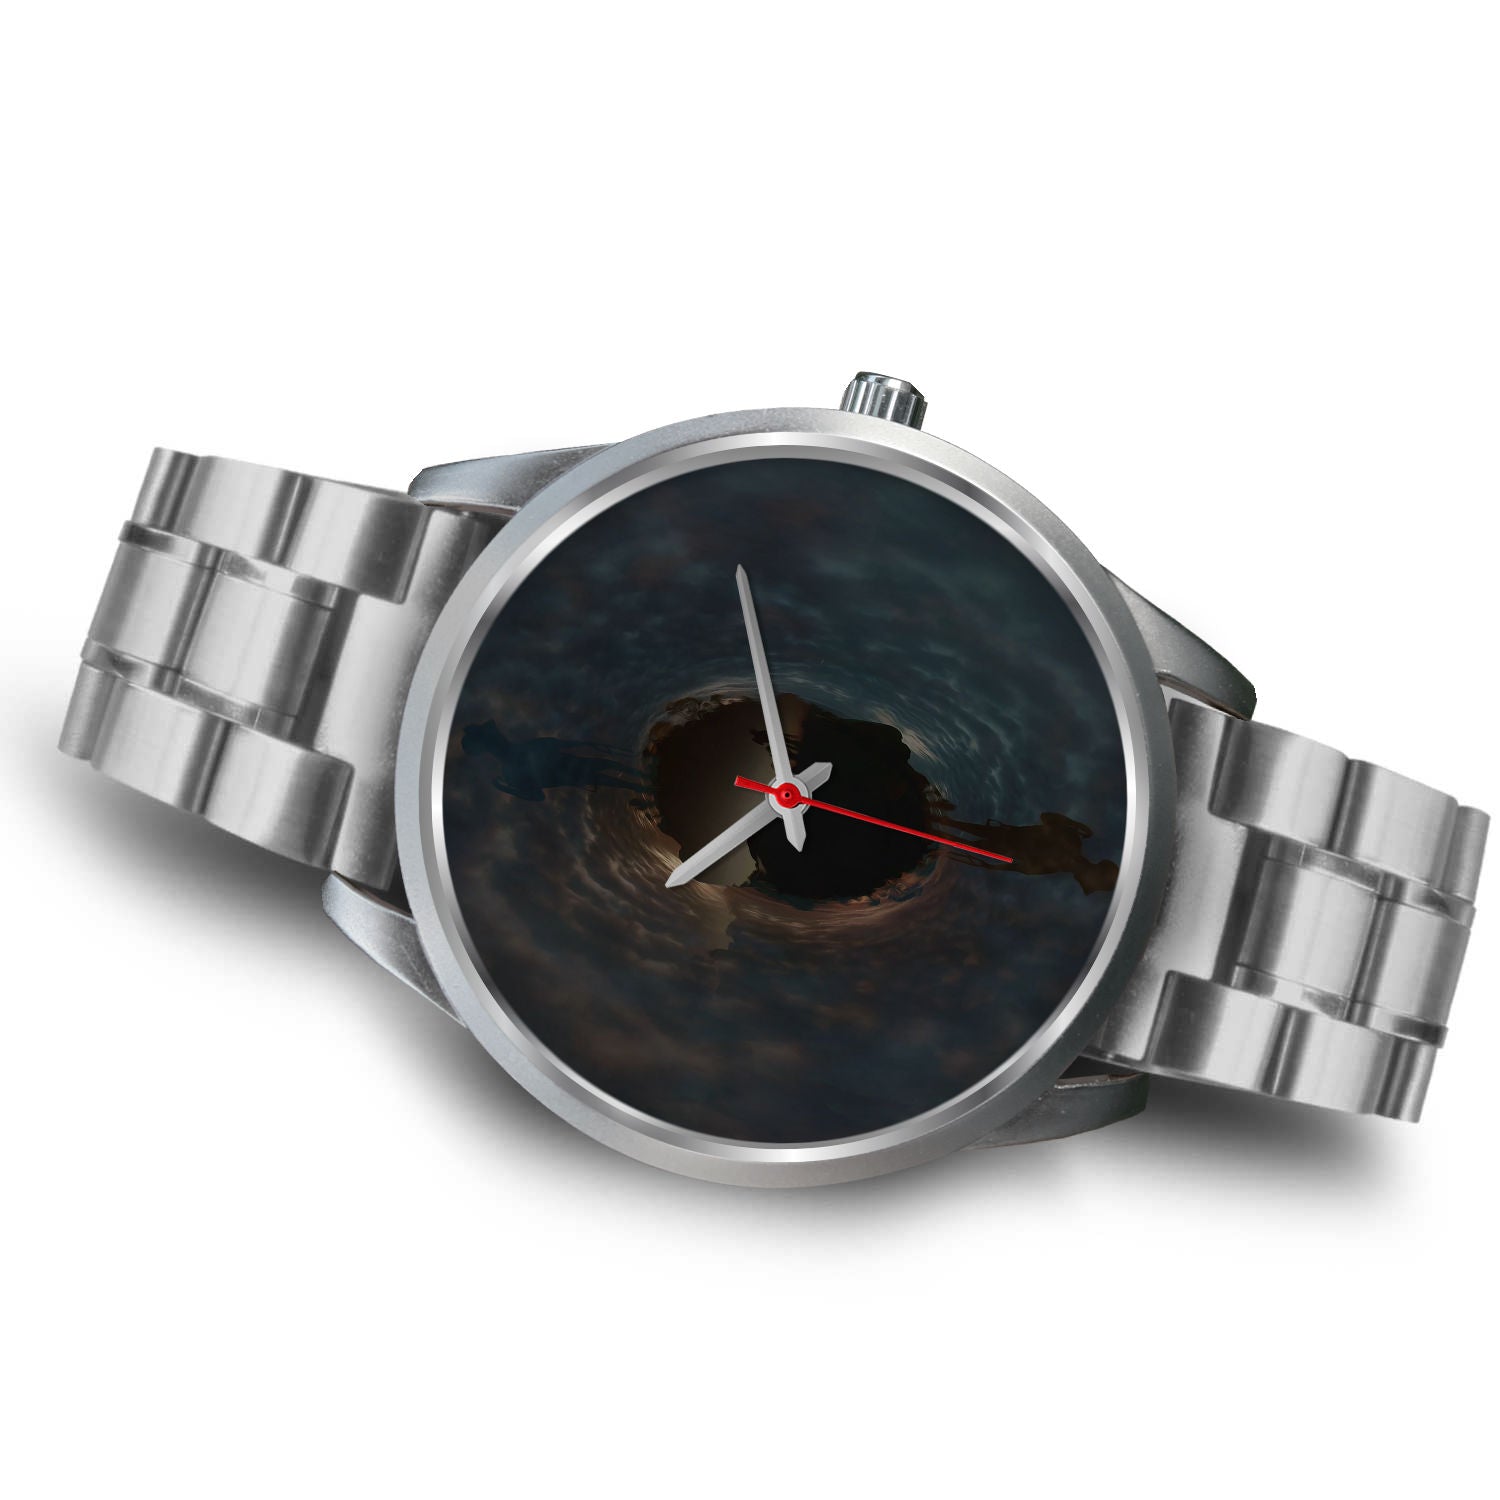 SILVER WATCH - THE RINGER I - LIVINGARTLIFESTYLE - GIFT IDEA - CHRISTMAS PRESENT